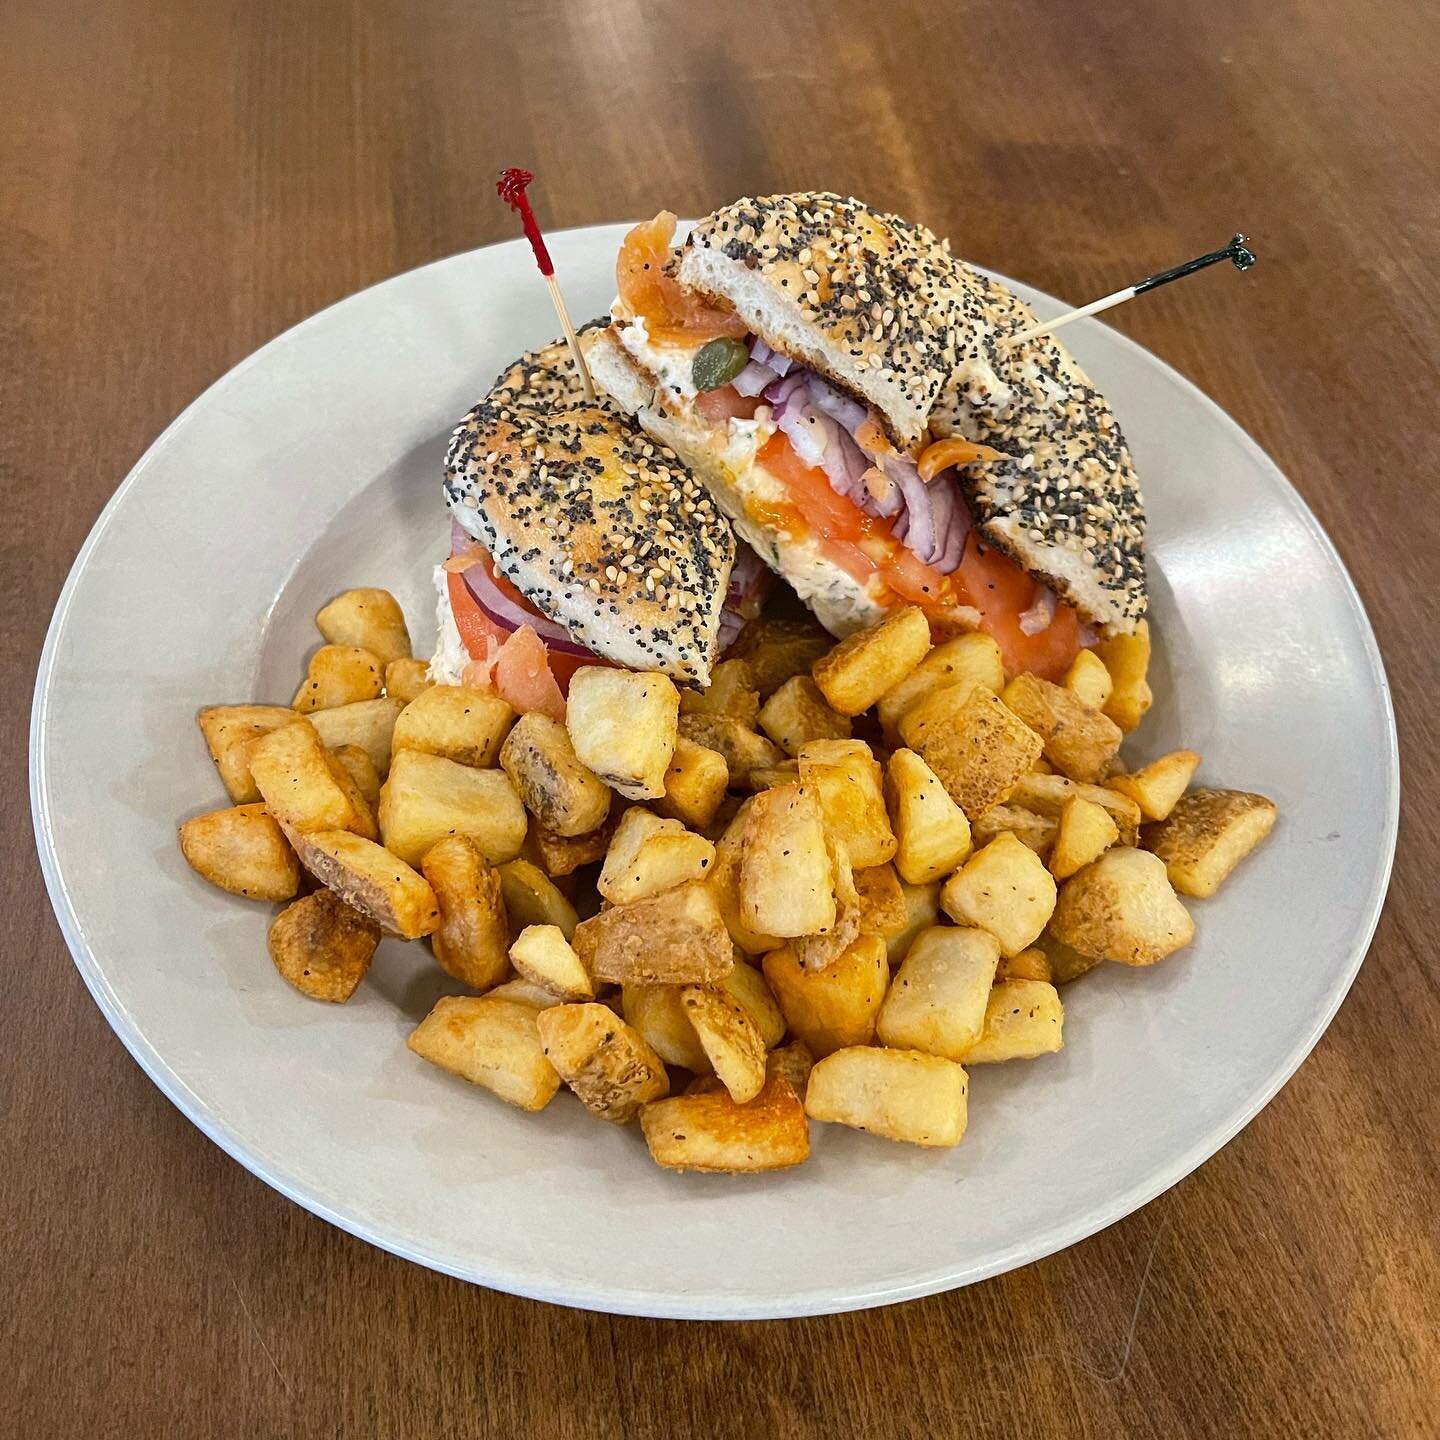 Smoked Salmon Bagel special! House made chive, dill &amp; smoked salmon cream cheese with red onion and capers on an everything bagel with some home fries on the side! #rochestervt #rochestercafeandcountrystore